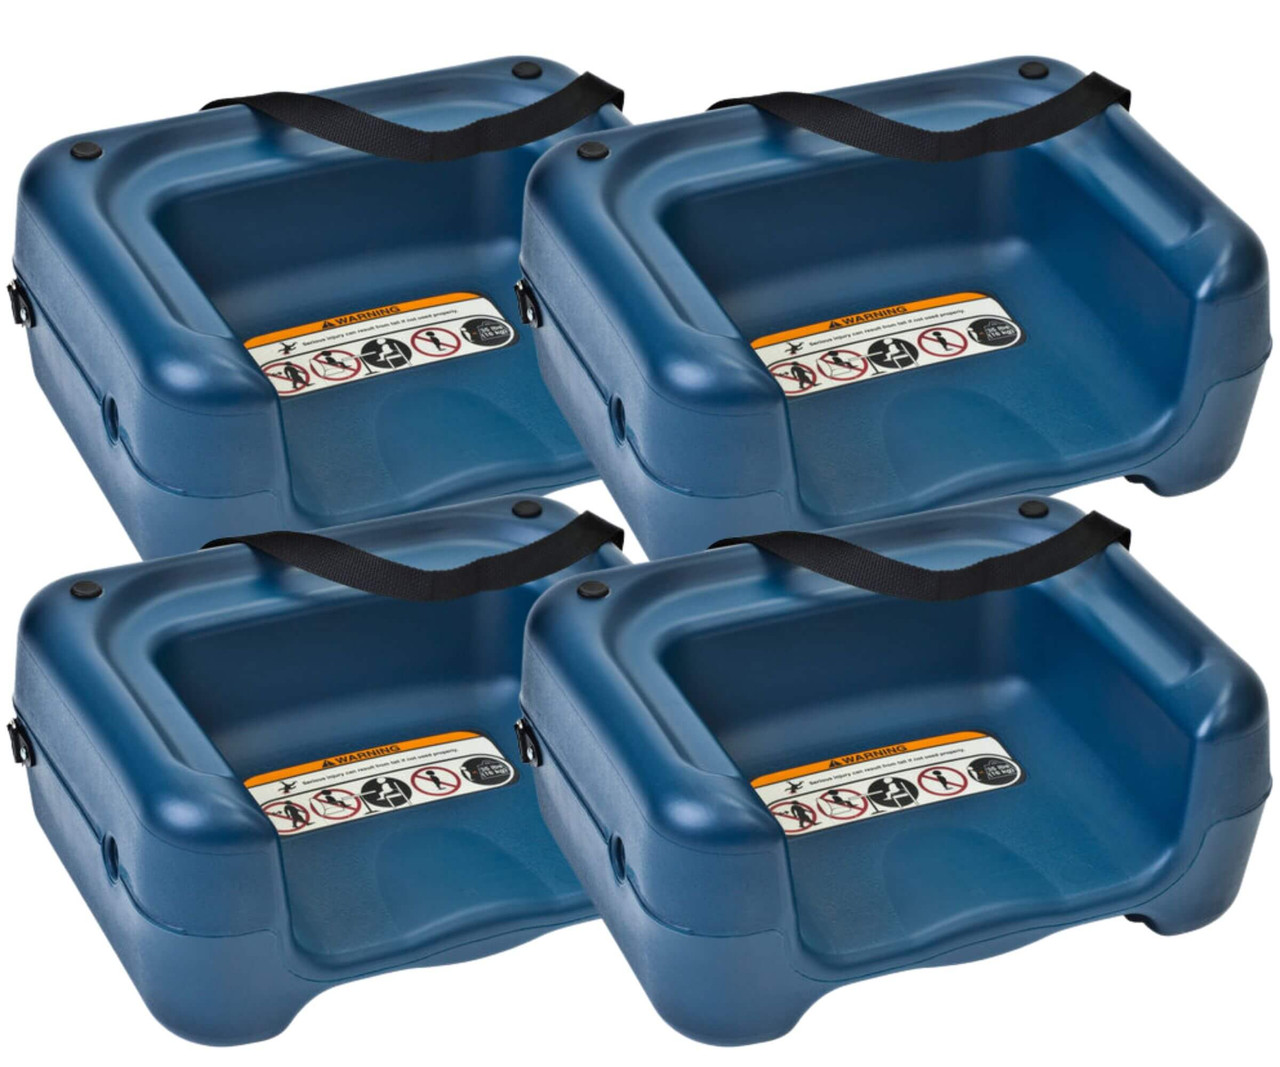 Koala Kare KB855-04S Blue Plastic Booster Seat with Safety Strap - Dual Height - 4/Pack- CHICKEN PIECES